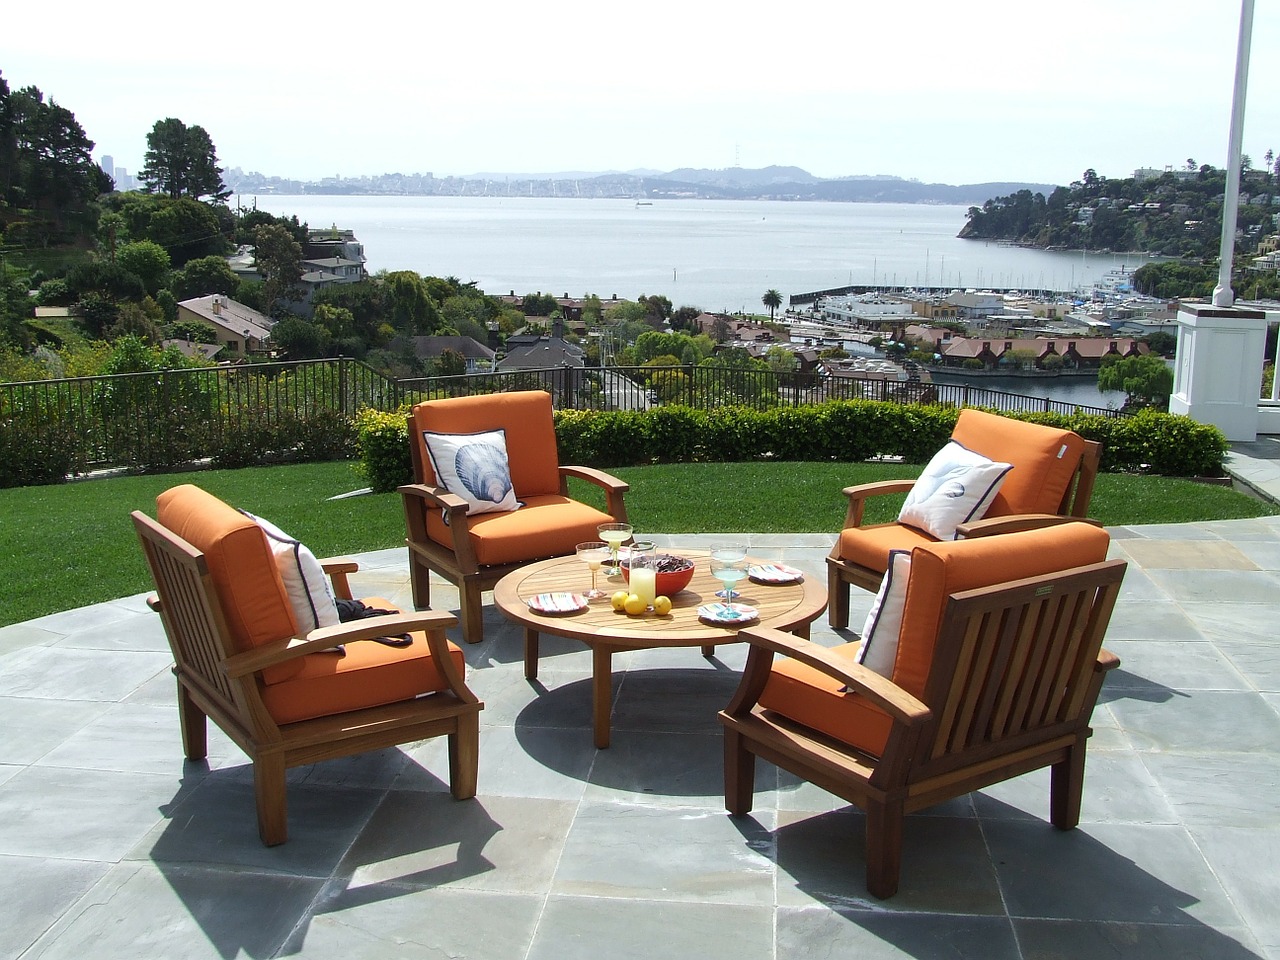 Soak Up The Sun In A New Garden Seating Area